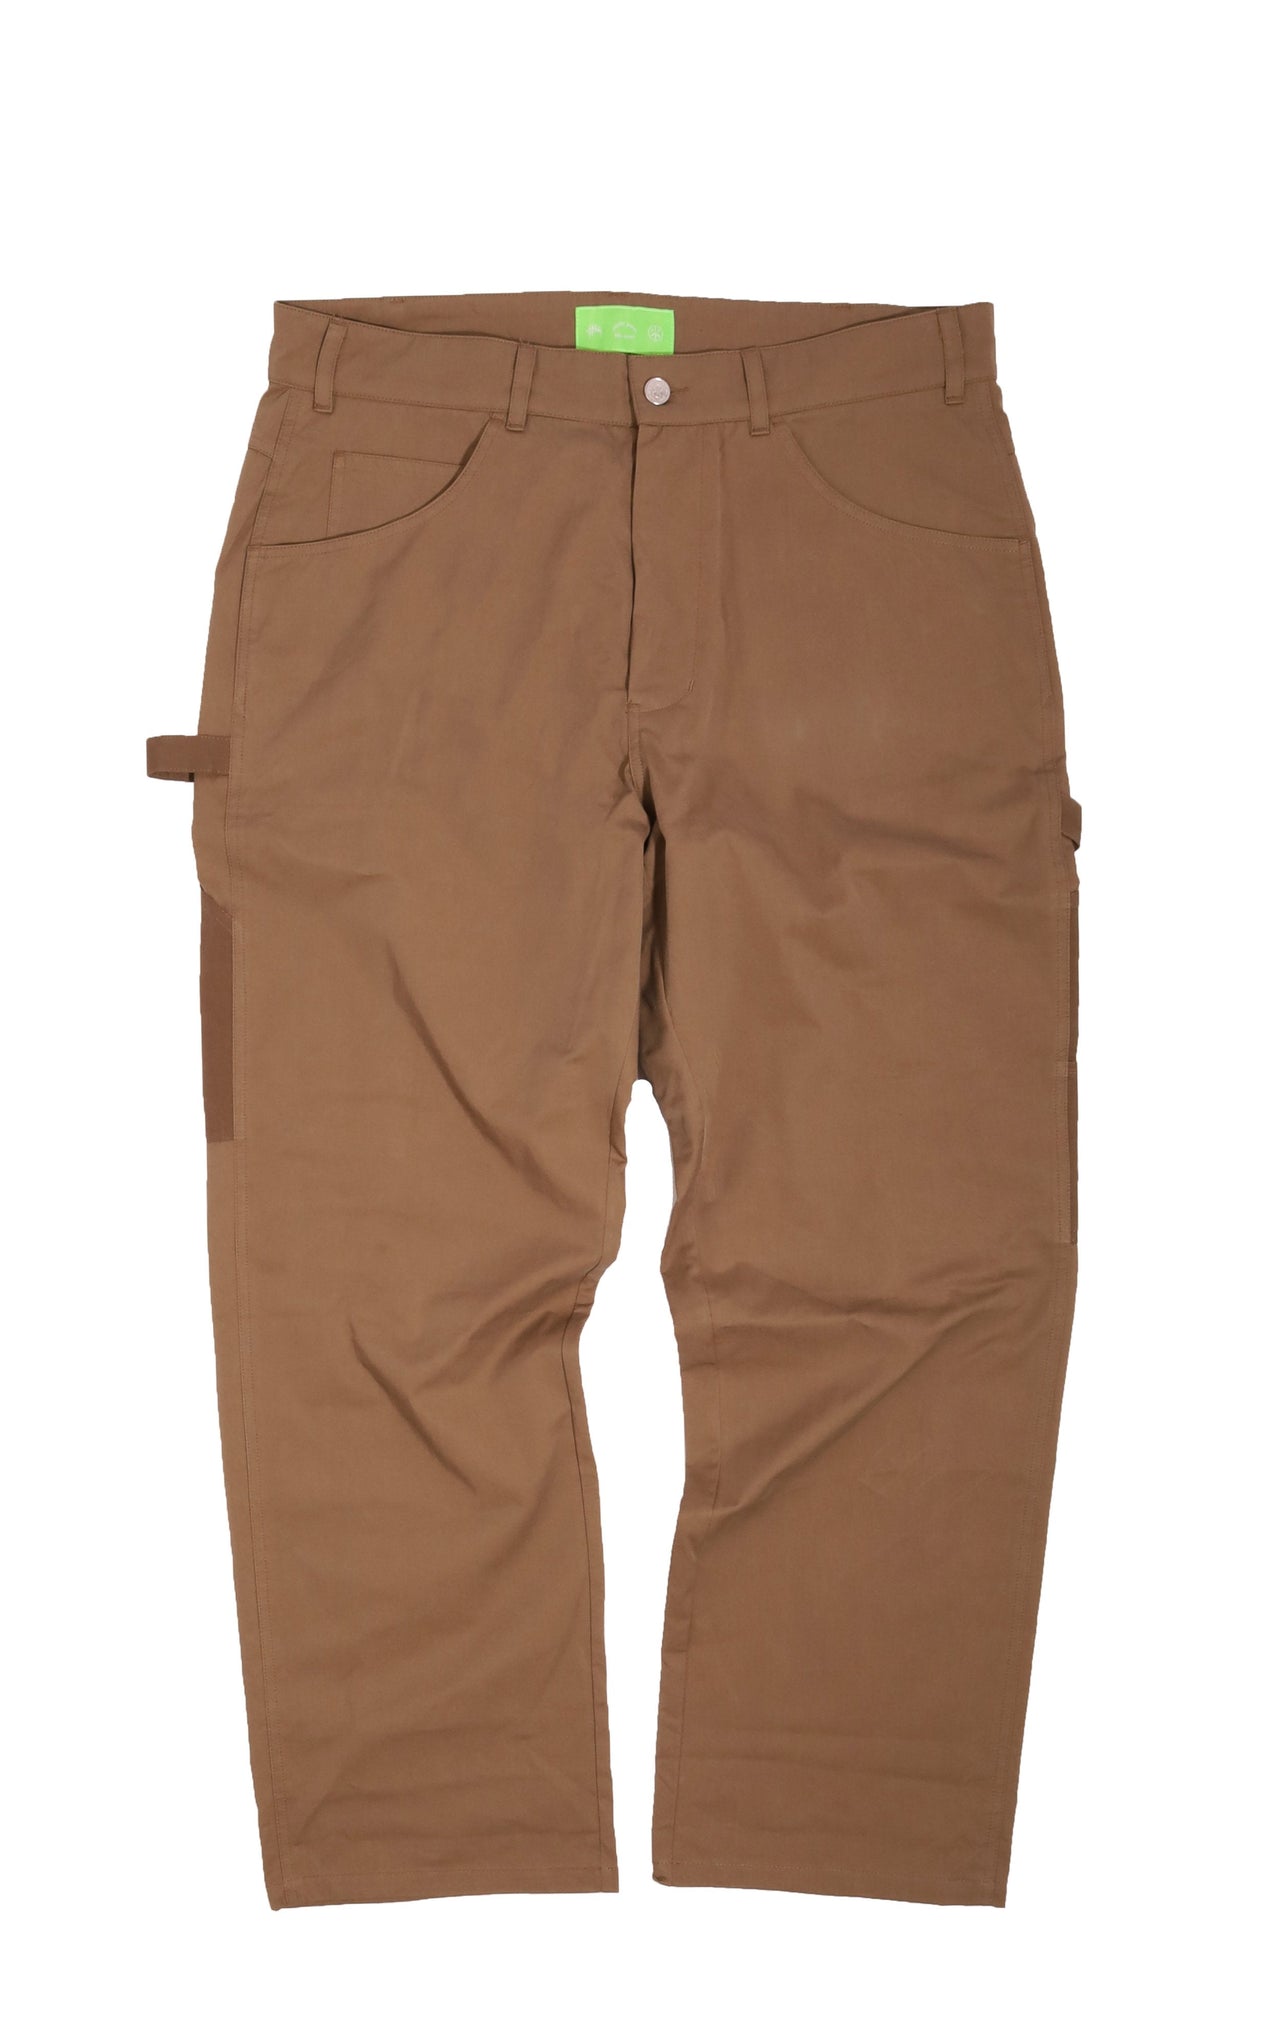 Off Road Utility Pant